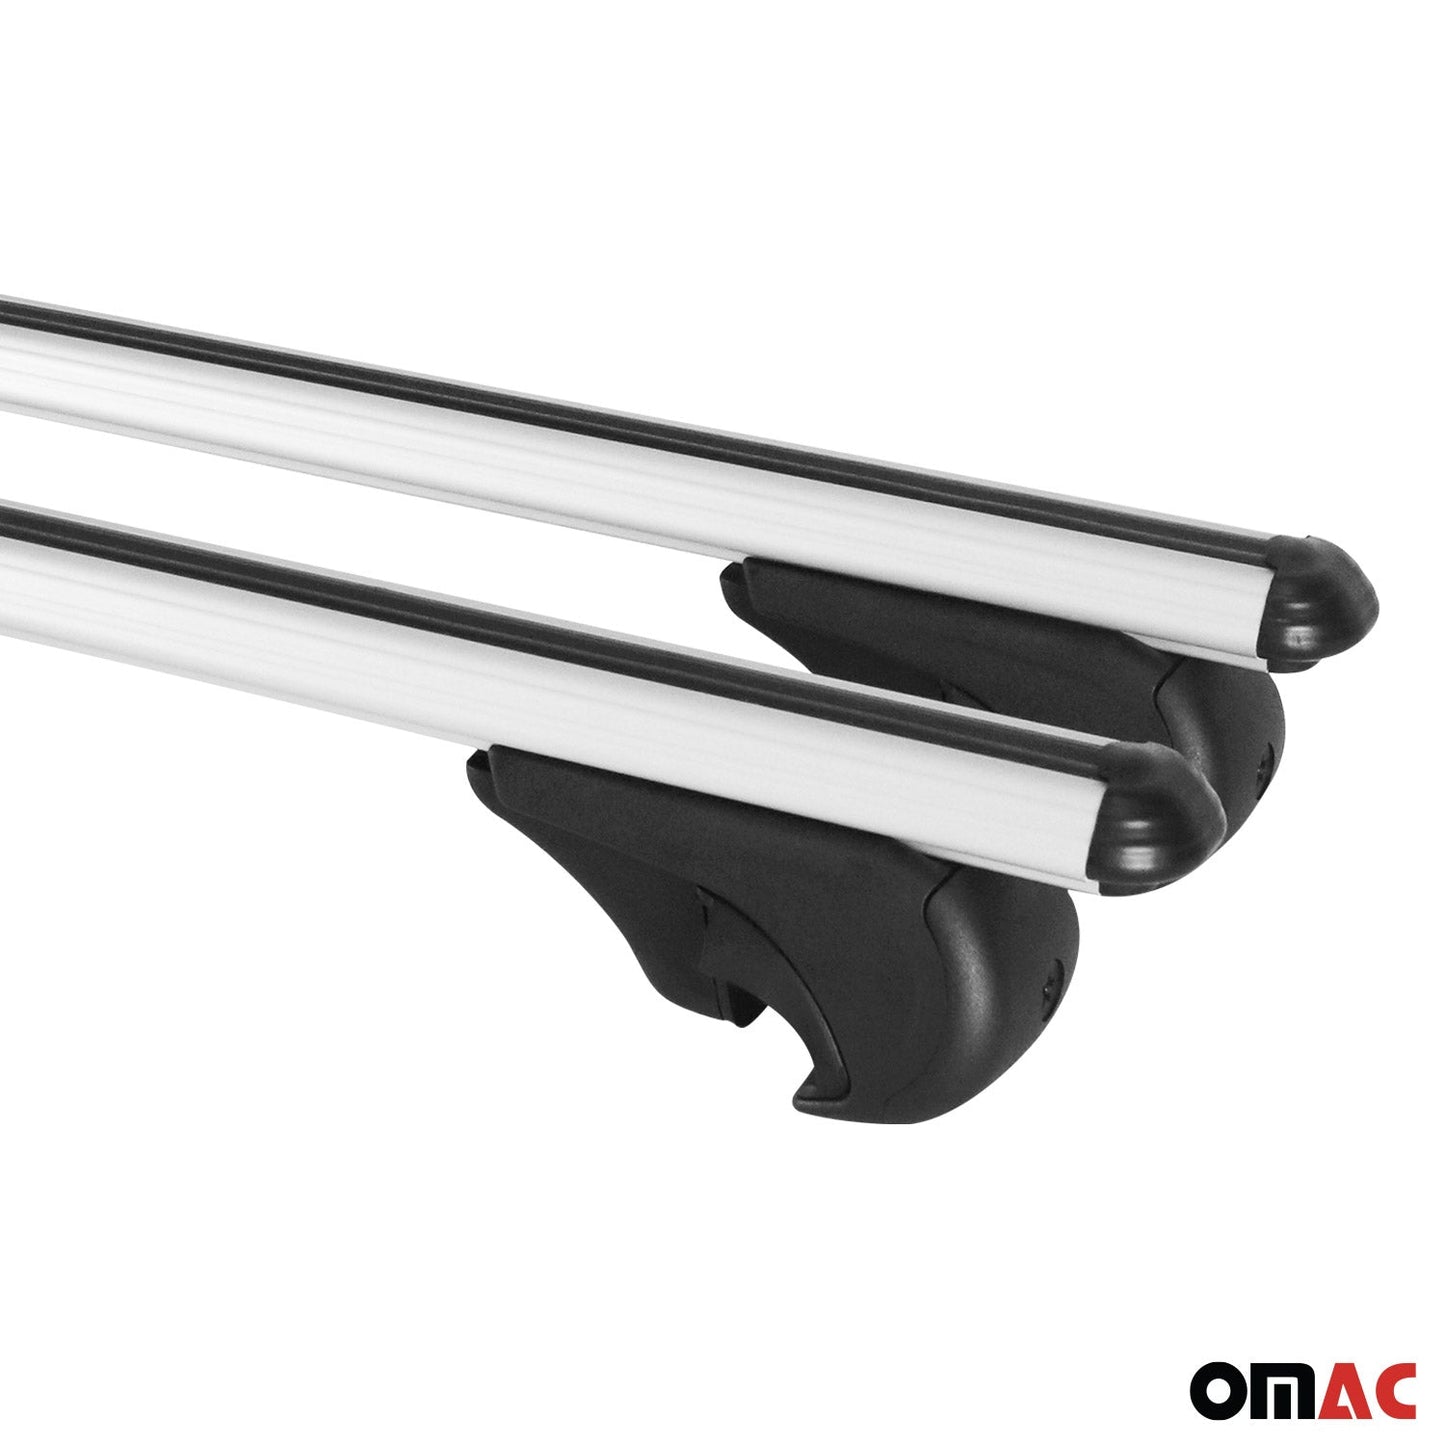 OMAC Lockable Roof Rack Cross Bars Carrier for Chrysler Town & Country 2001-2007 Gray 19069696929M